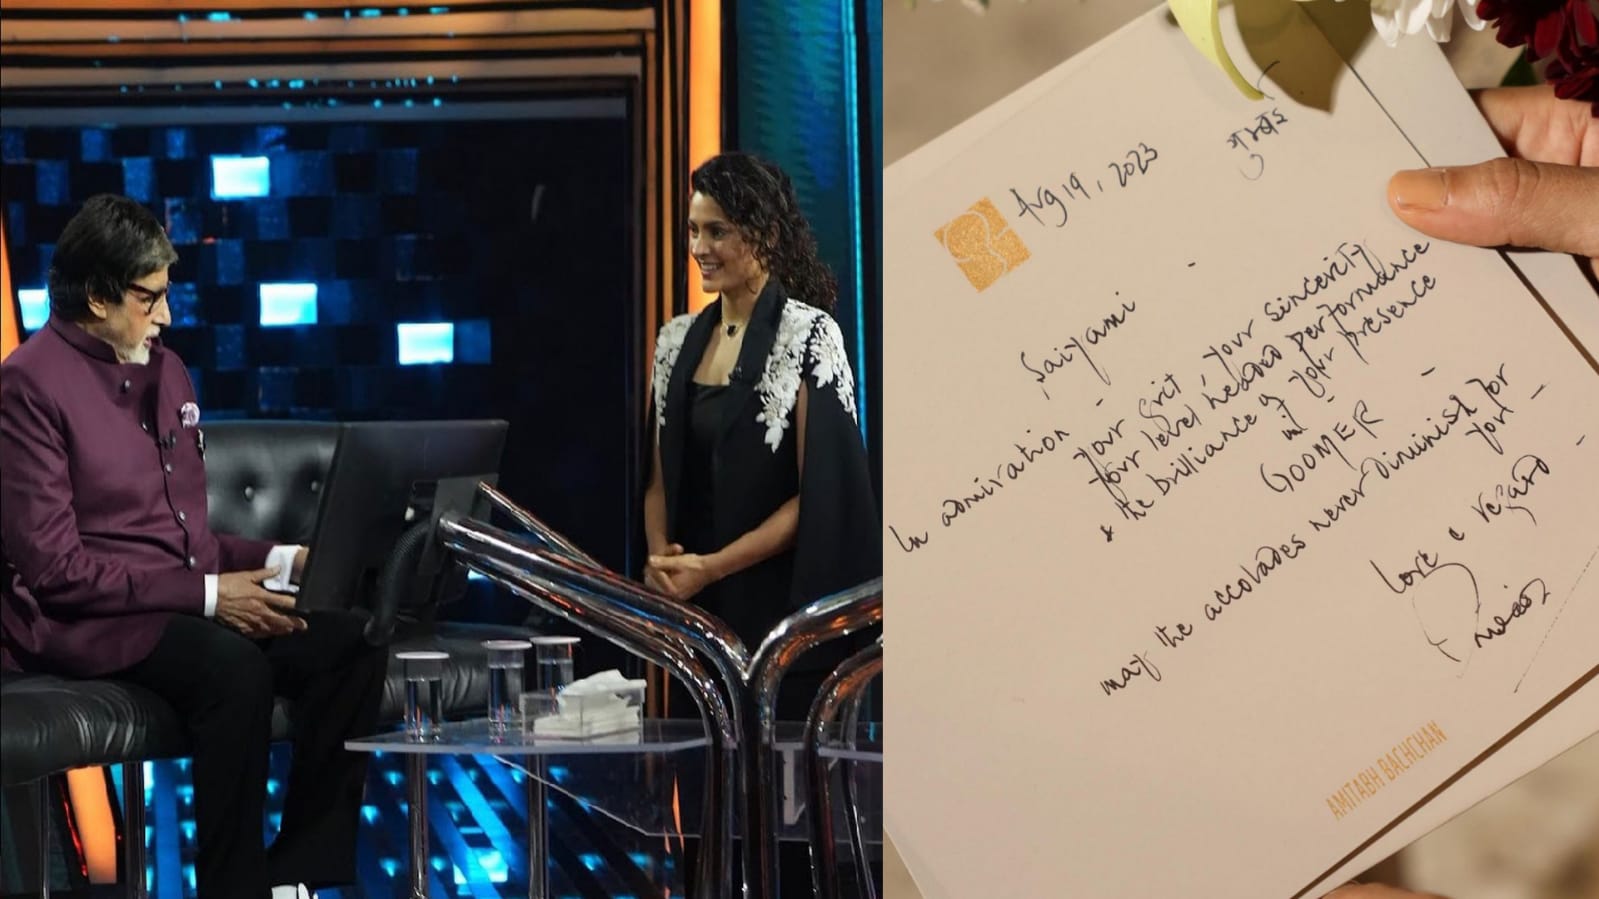 Saiyami Kher Emotional Over Personal Letter from Amitabh Bachchan – Shares Pic